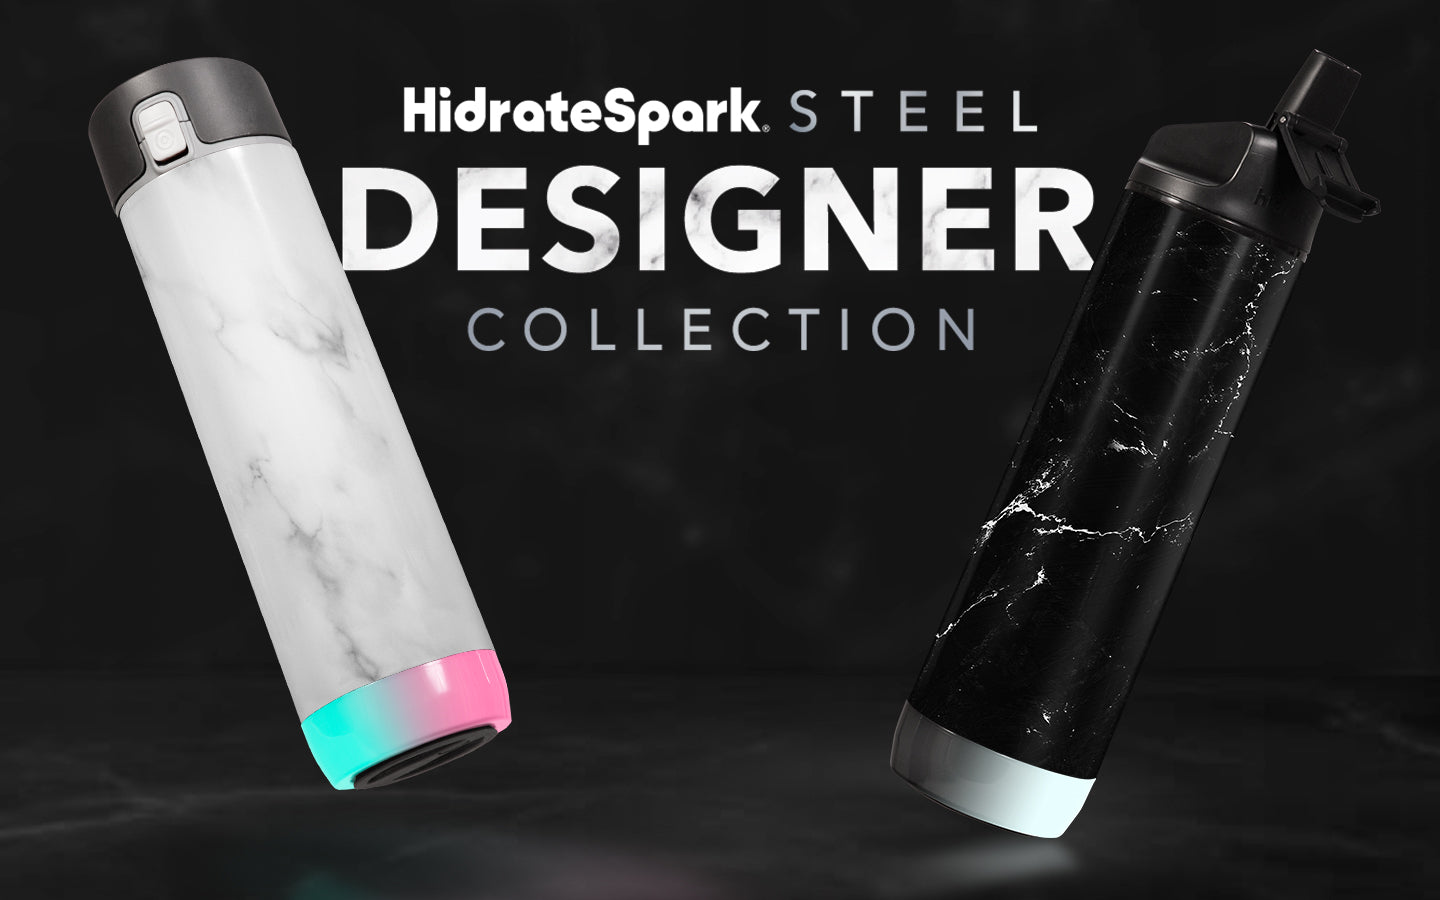 Introducing the Designer Collection in Marble! The latest from HidrateSpark STEEL